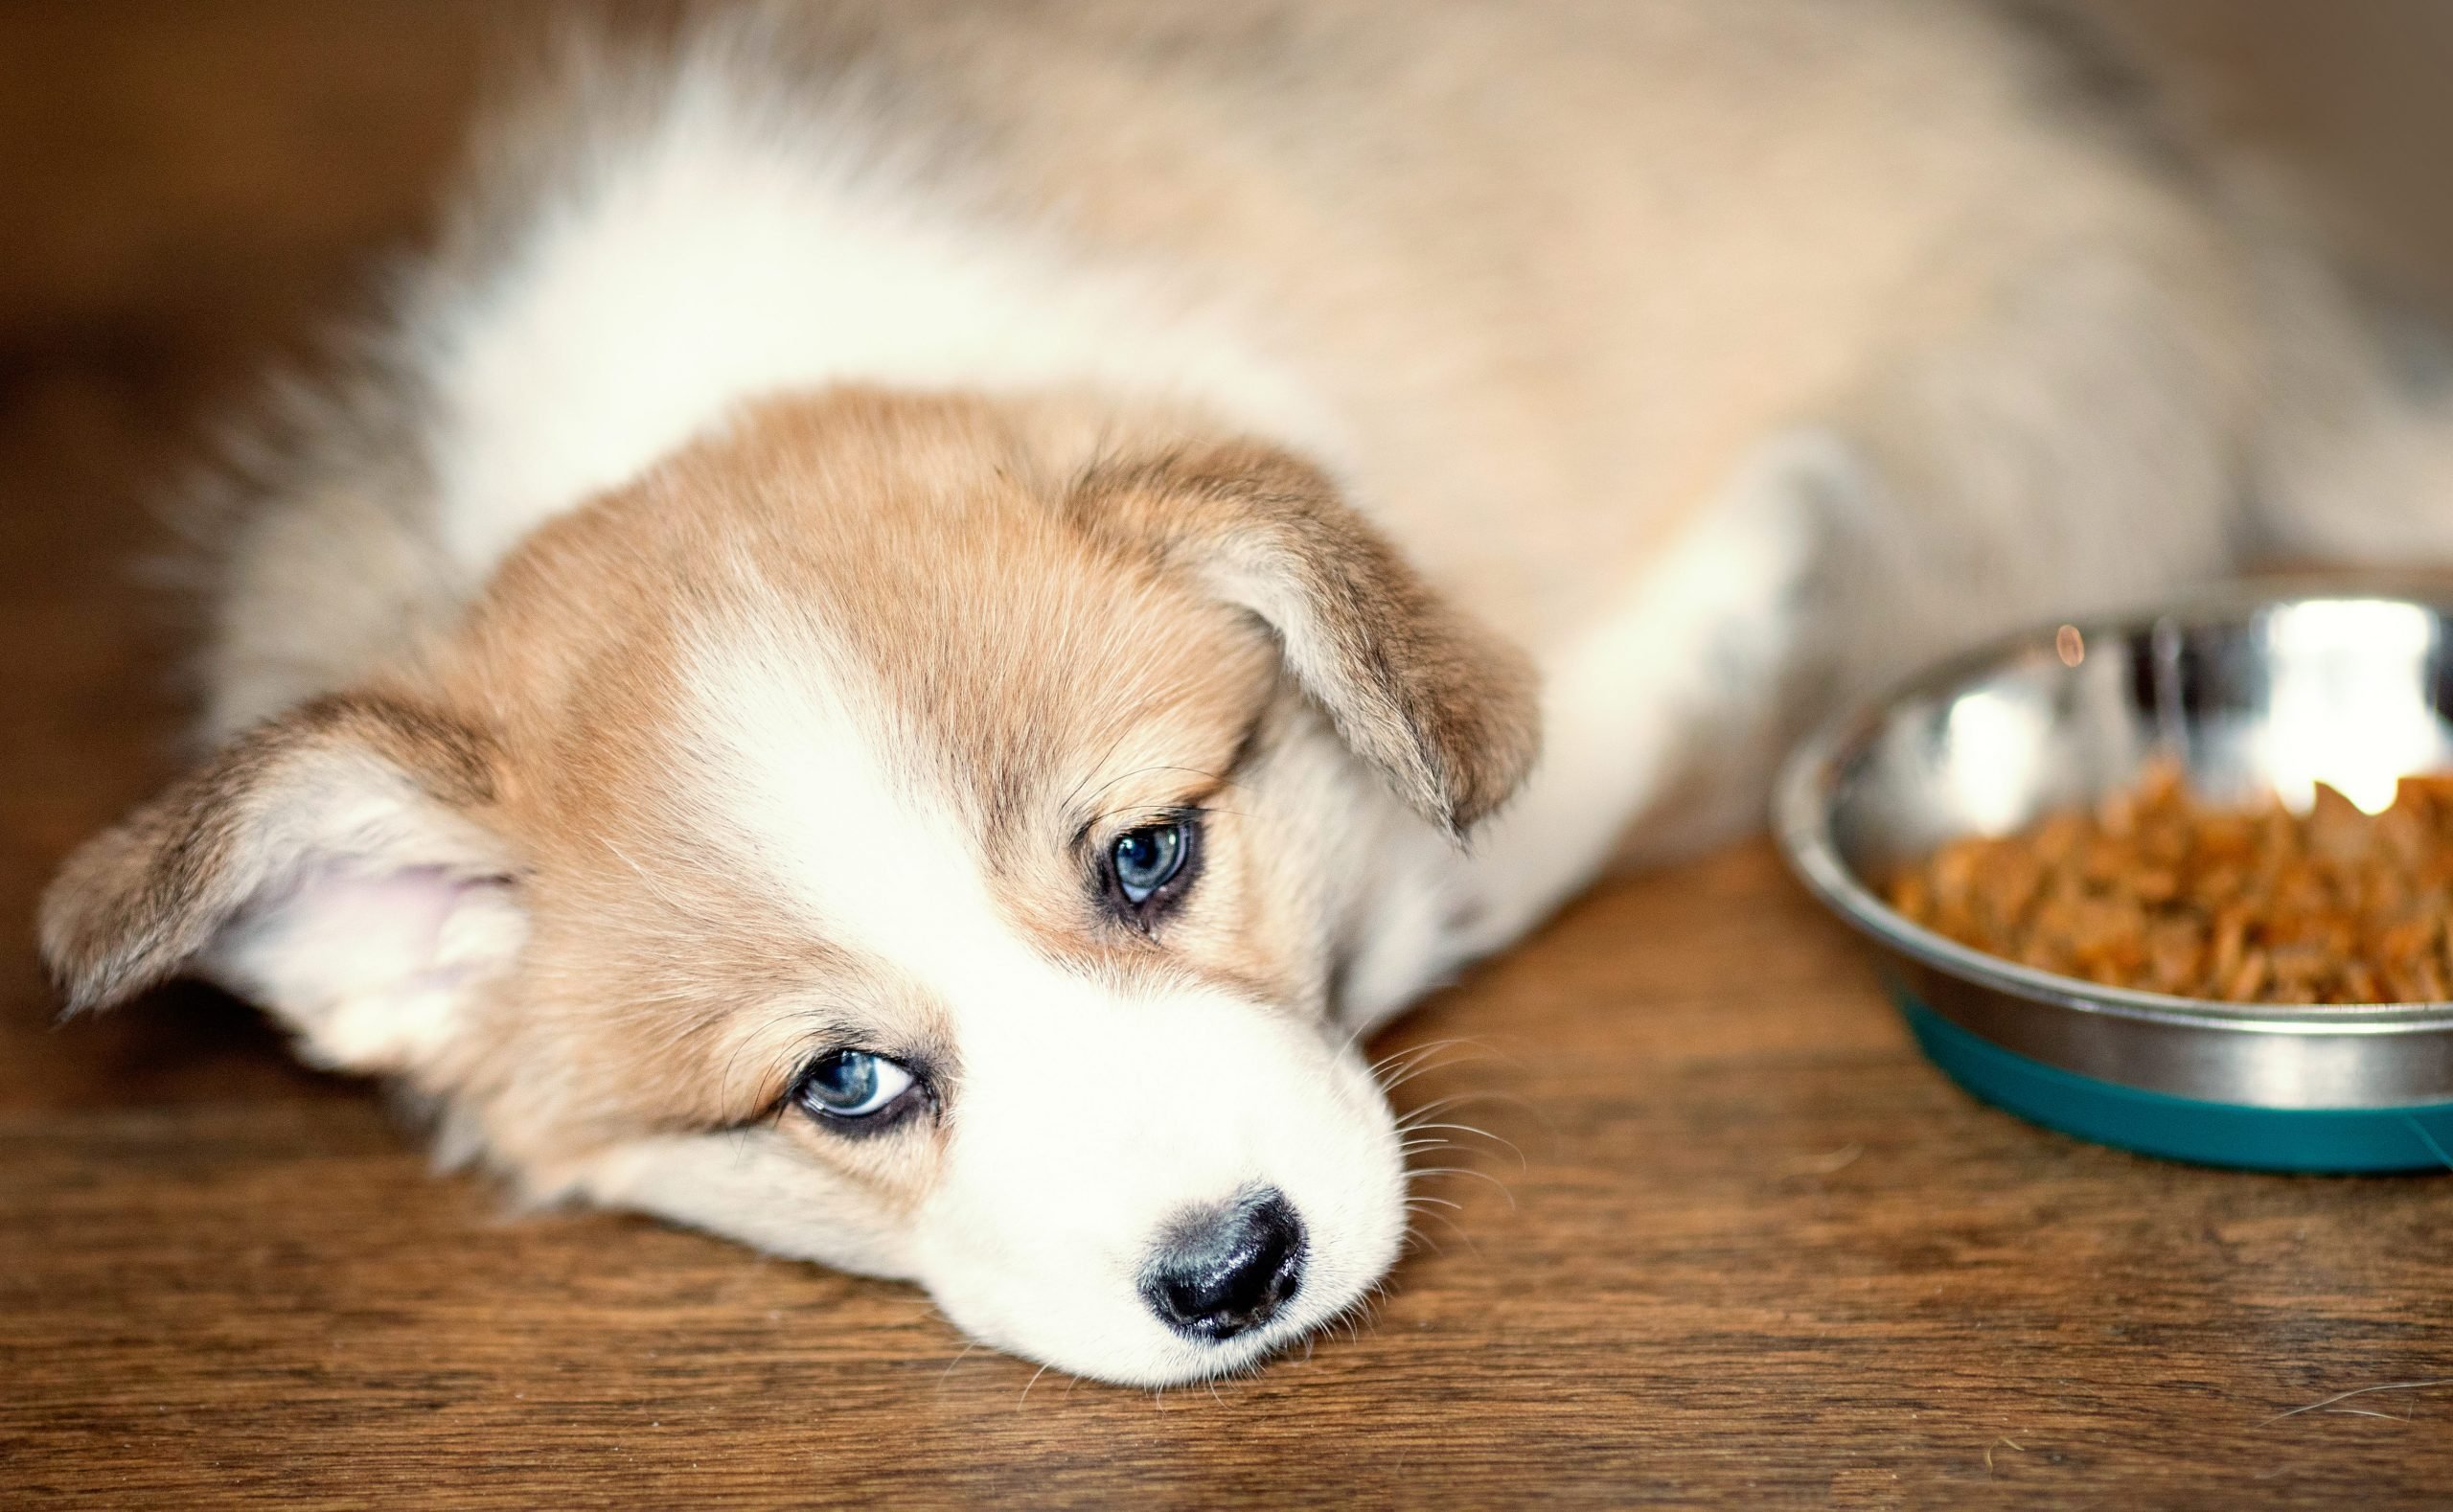 Why is my dog suddenly not eating?